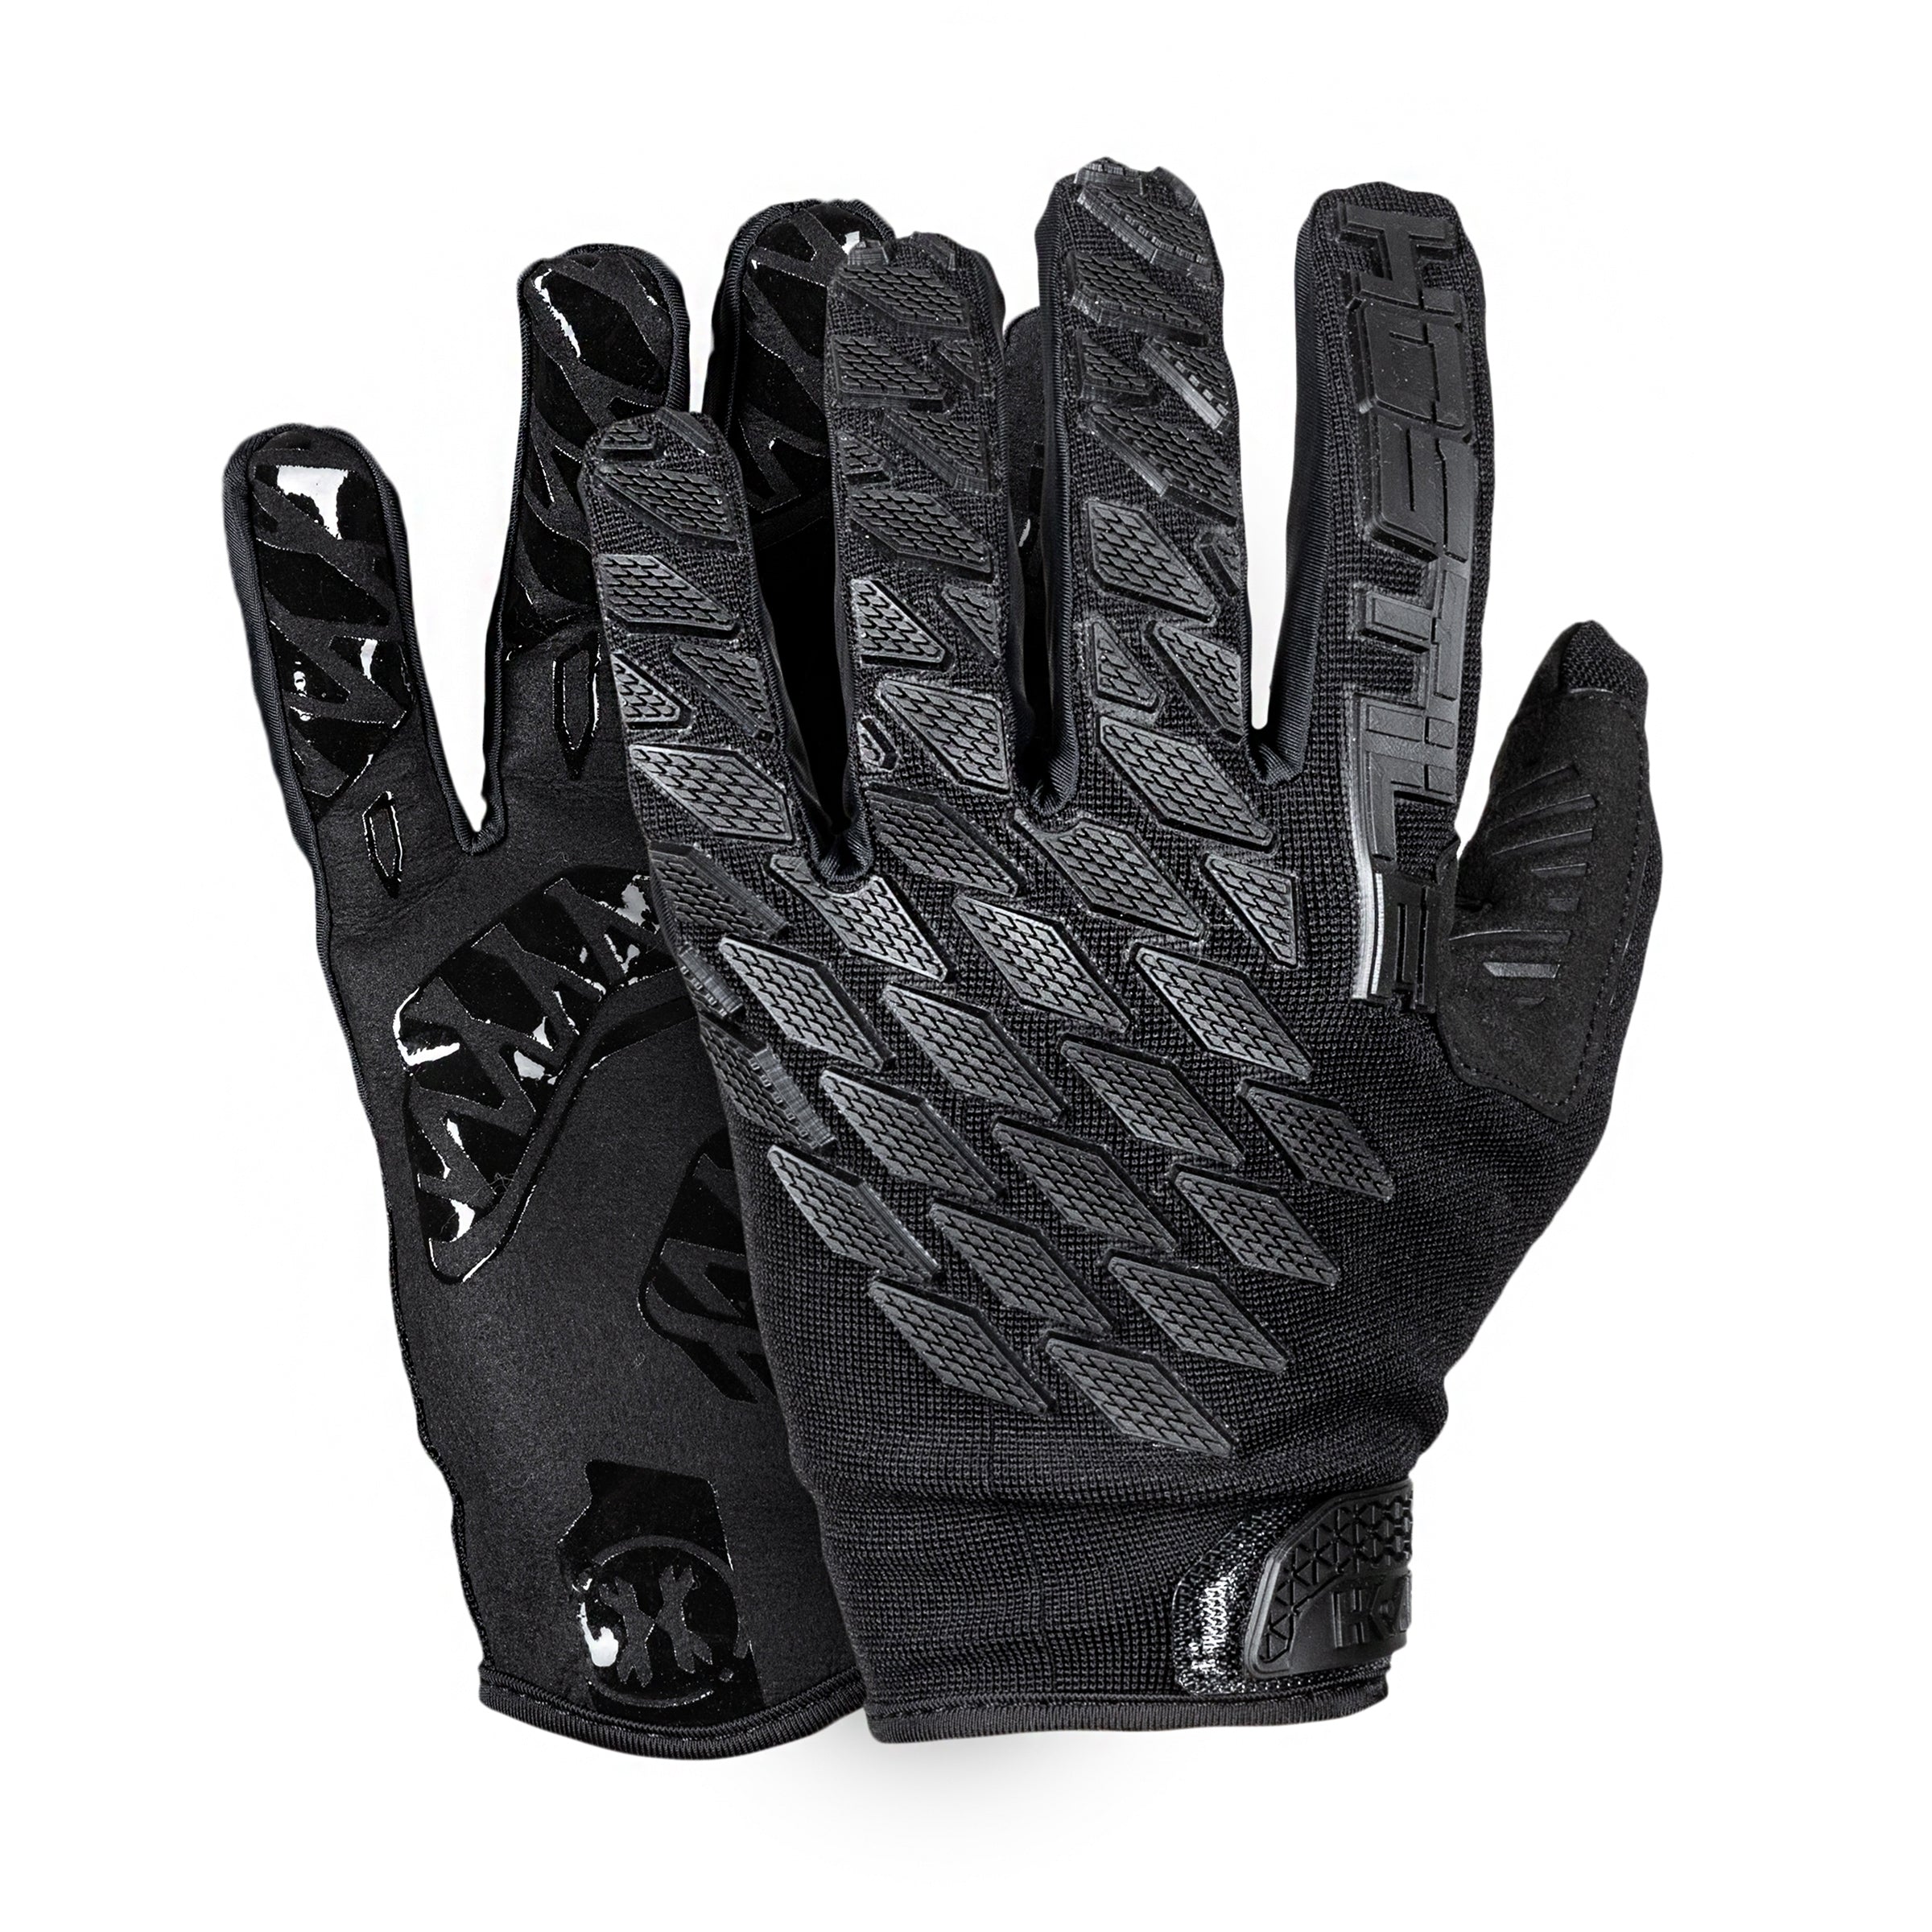 HOSTILE ARMORED GLOVE - SHADOW - Eminent Paintball And Airsoft